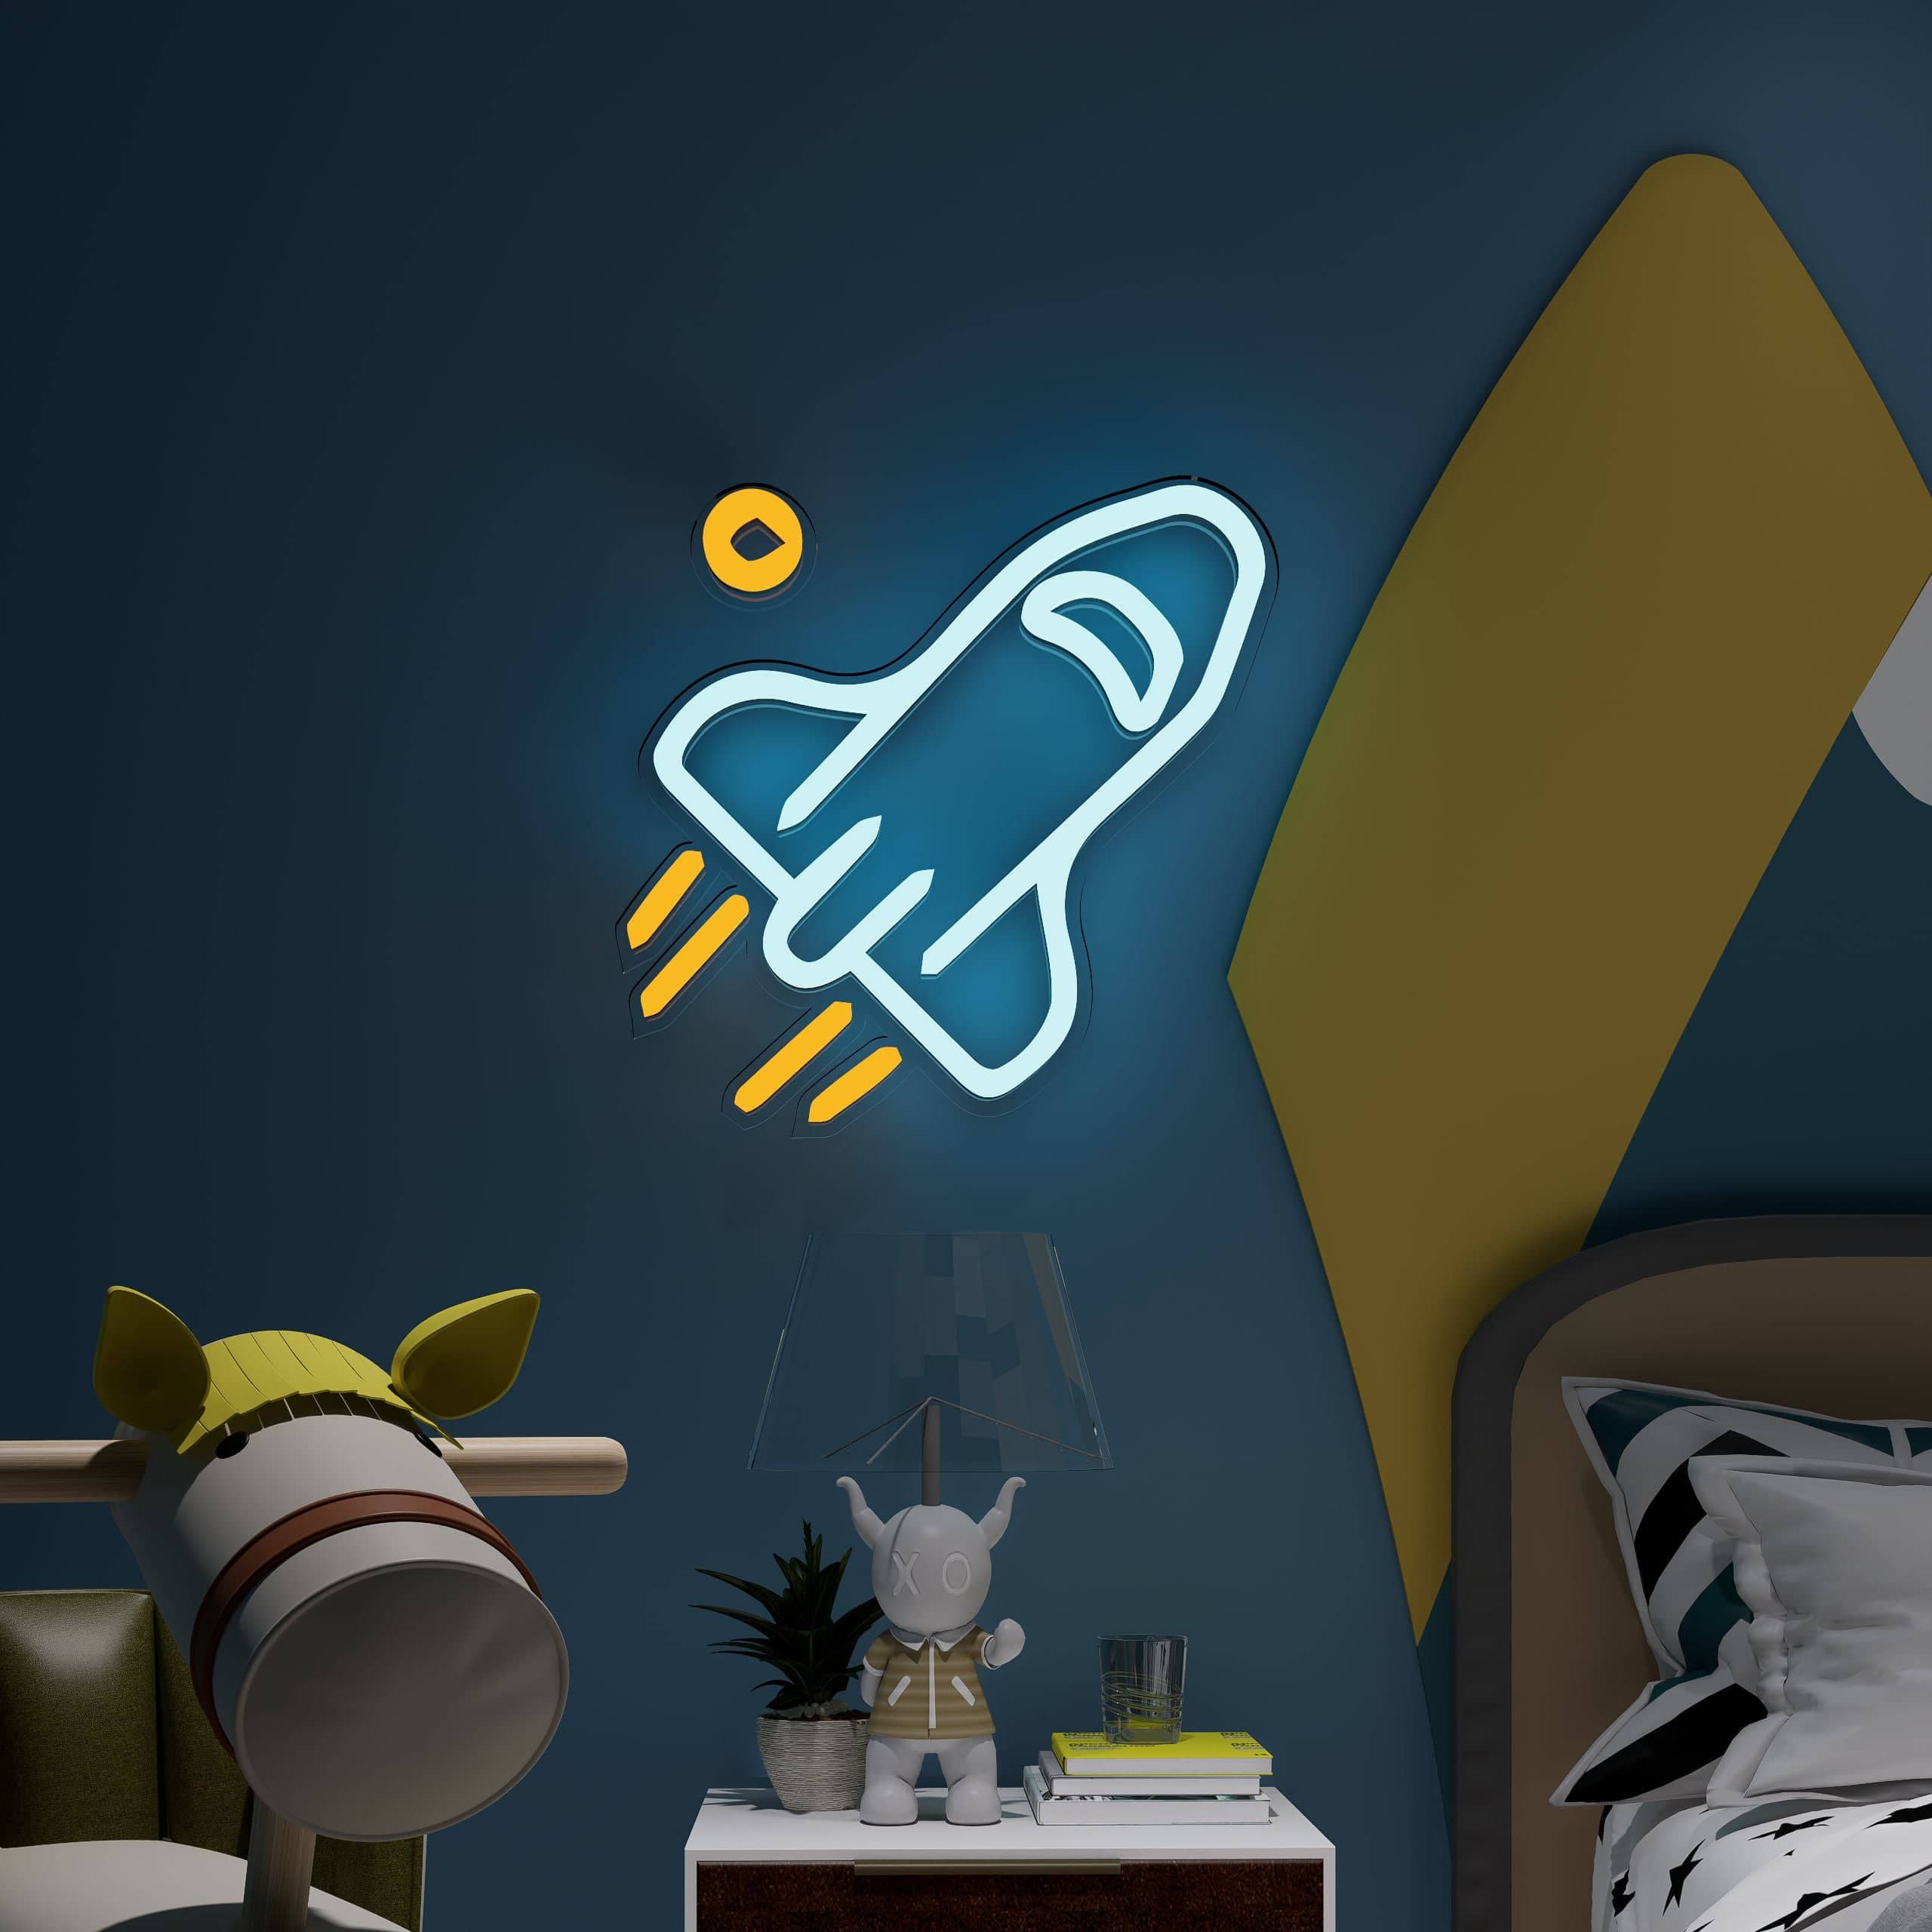 Creative neon signs for kids room with space-themed rocket